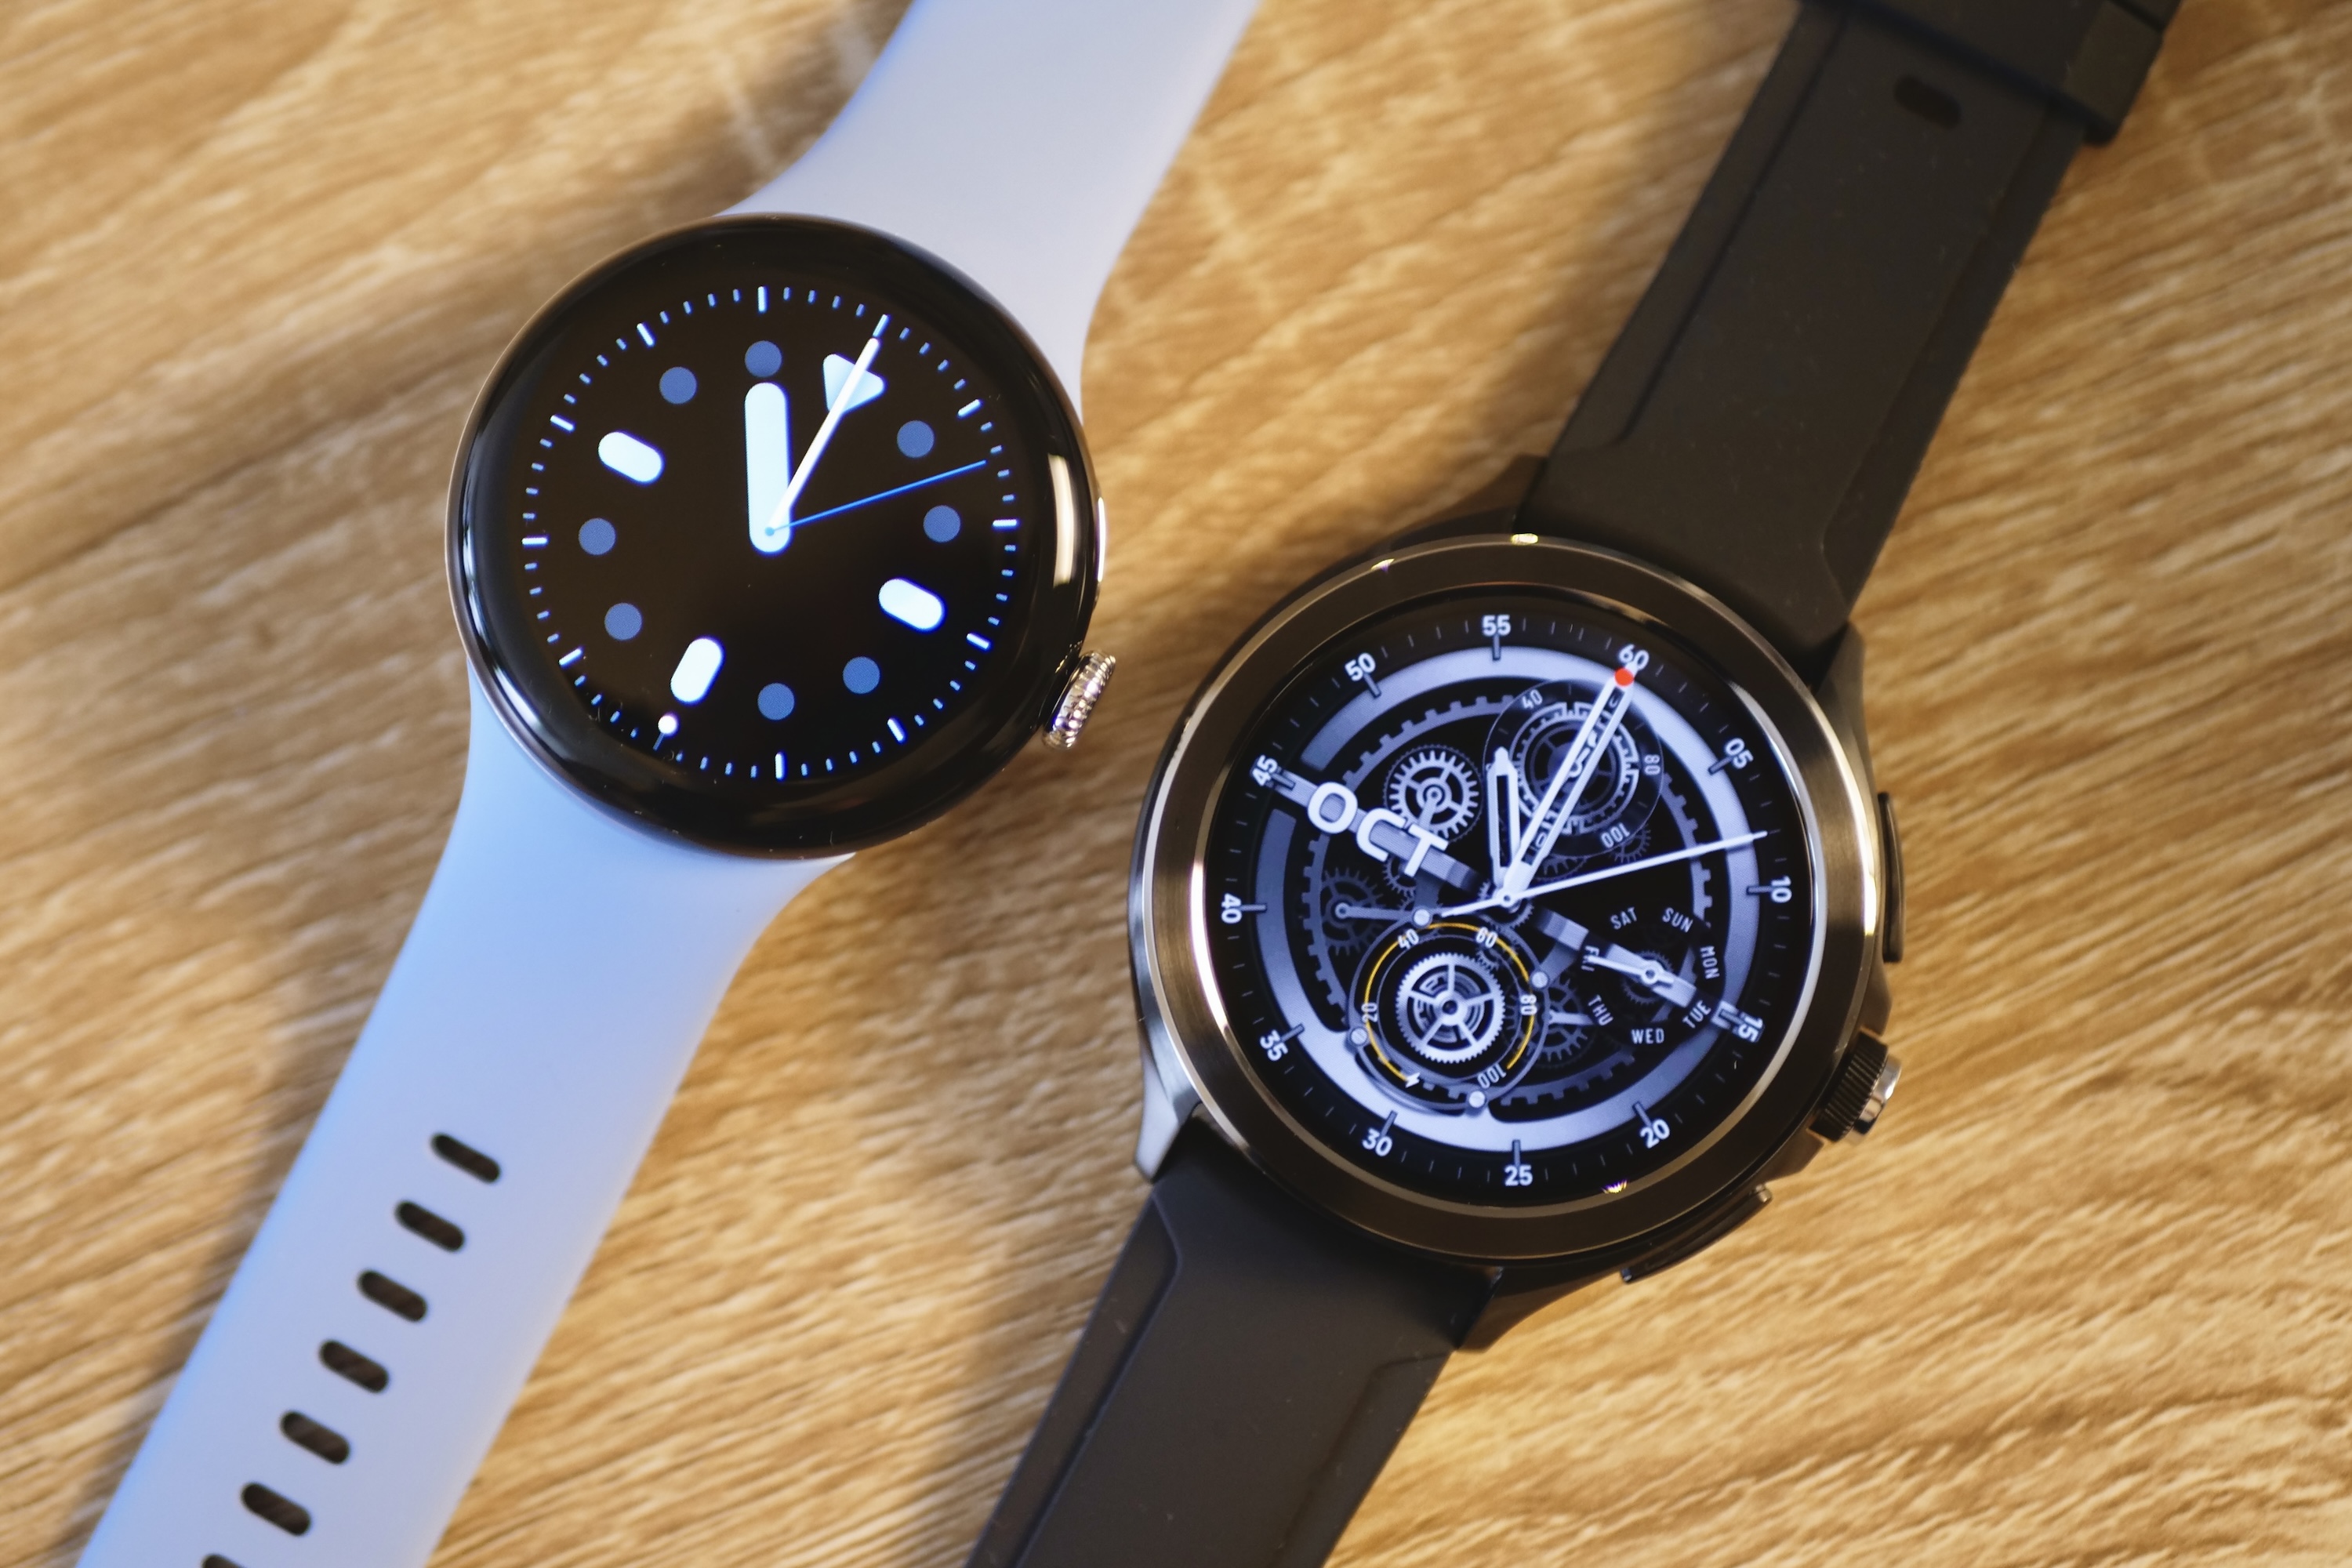 The Xiaomi Watch 2 Pro and the Pixel Watch 2, seen from the front.